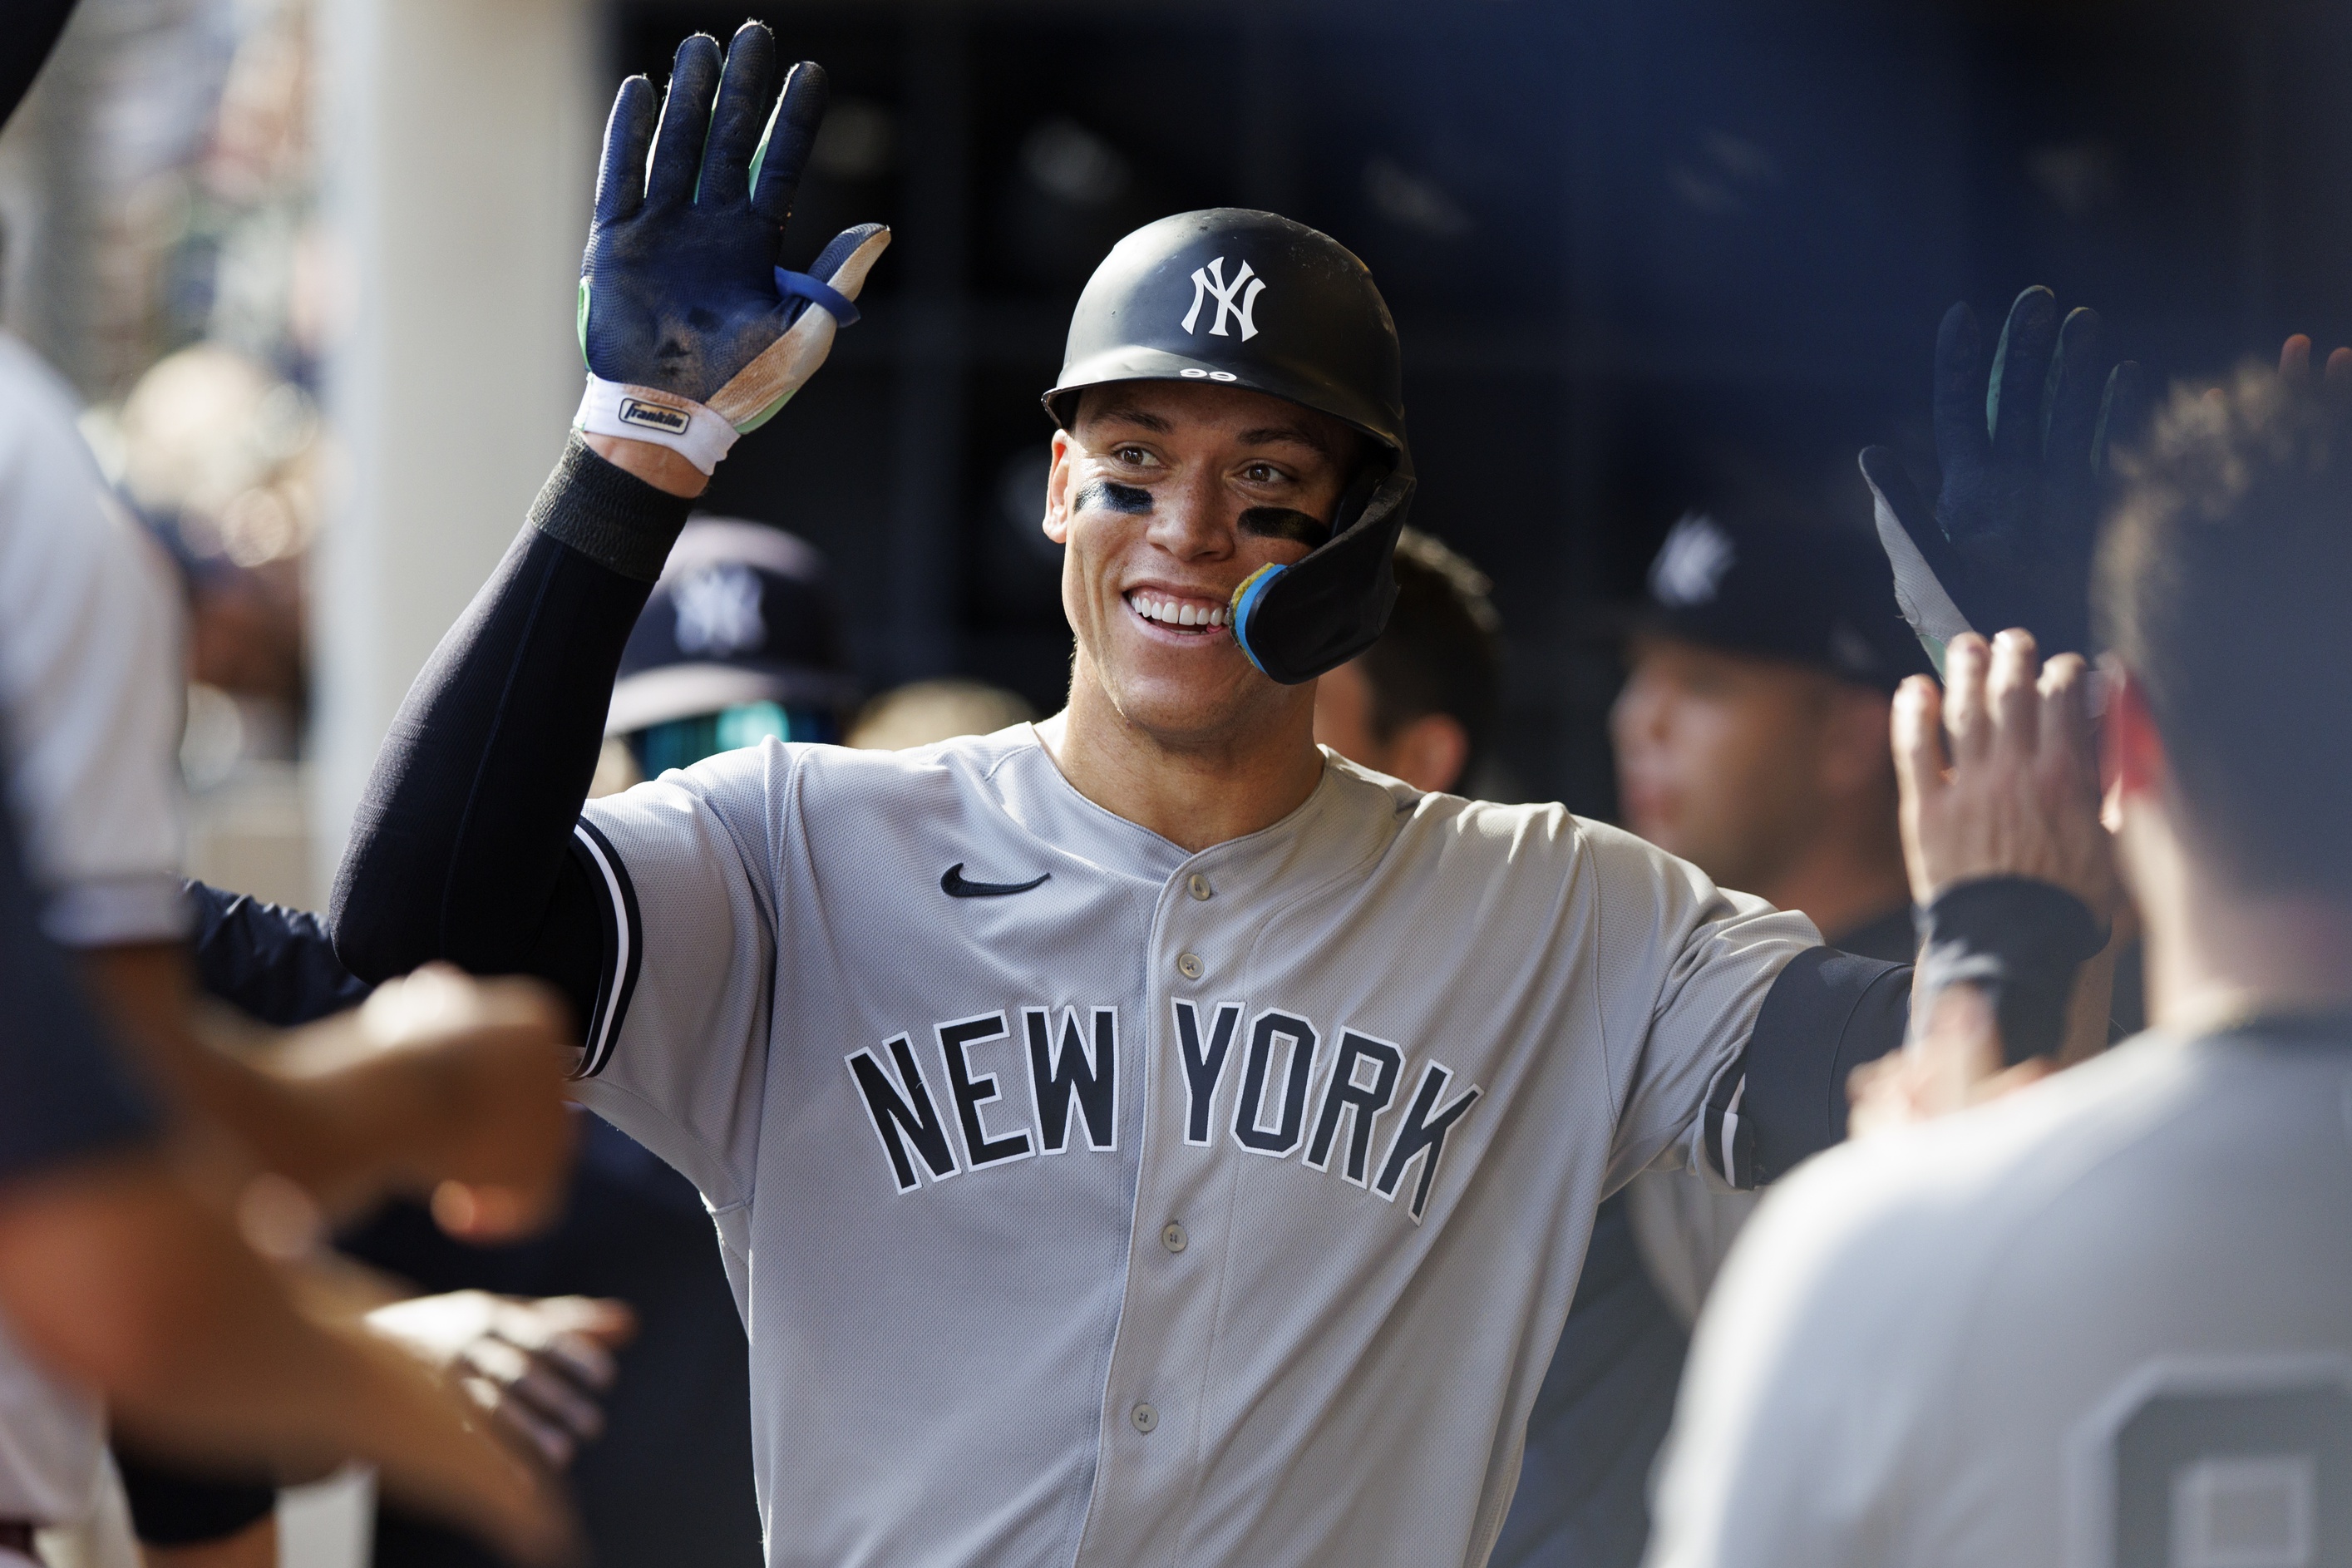 A Trip to the Dentist Becomes the Latest Twist in Aaron Judge's Eventful  Season - The New York Times